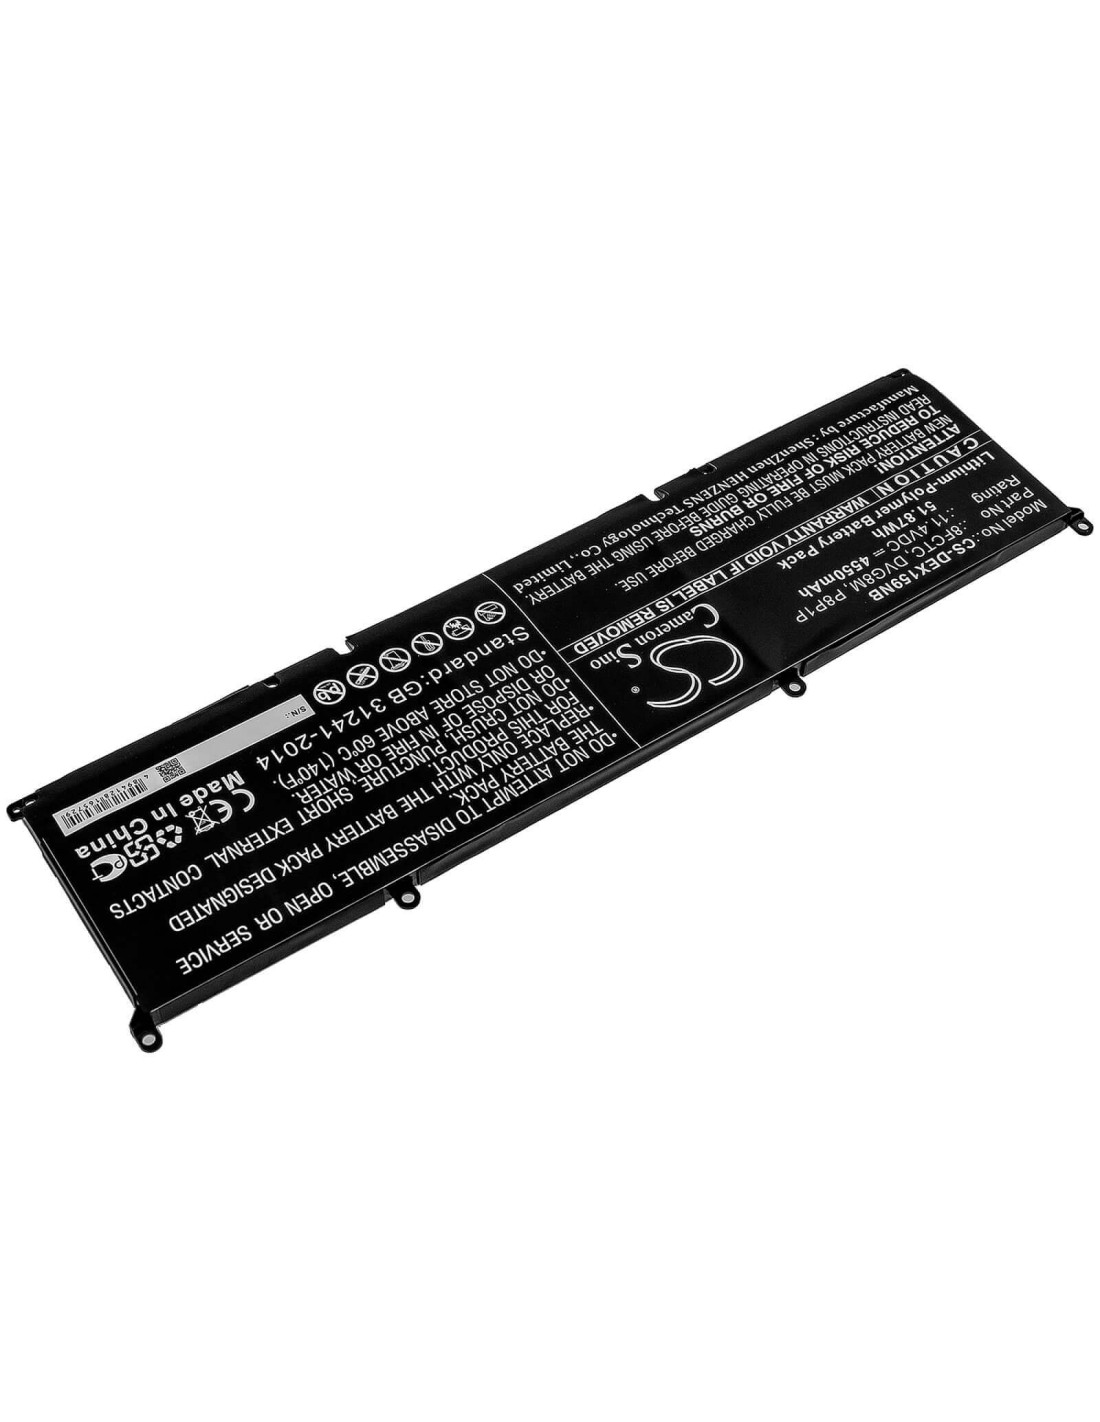 Battery for Dell, Xps 15 9500, Xps 15-9500-r1505s, Xps 15-9500-r1845s 11.4V, 4550mAh - 51.87Wh